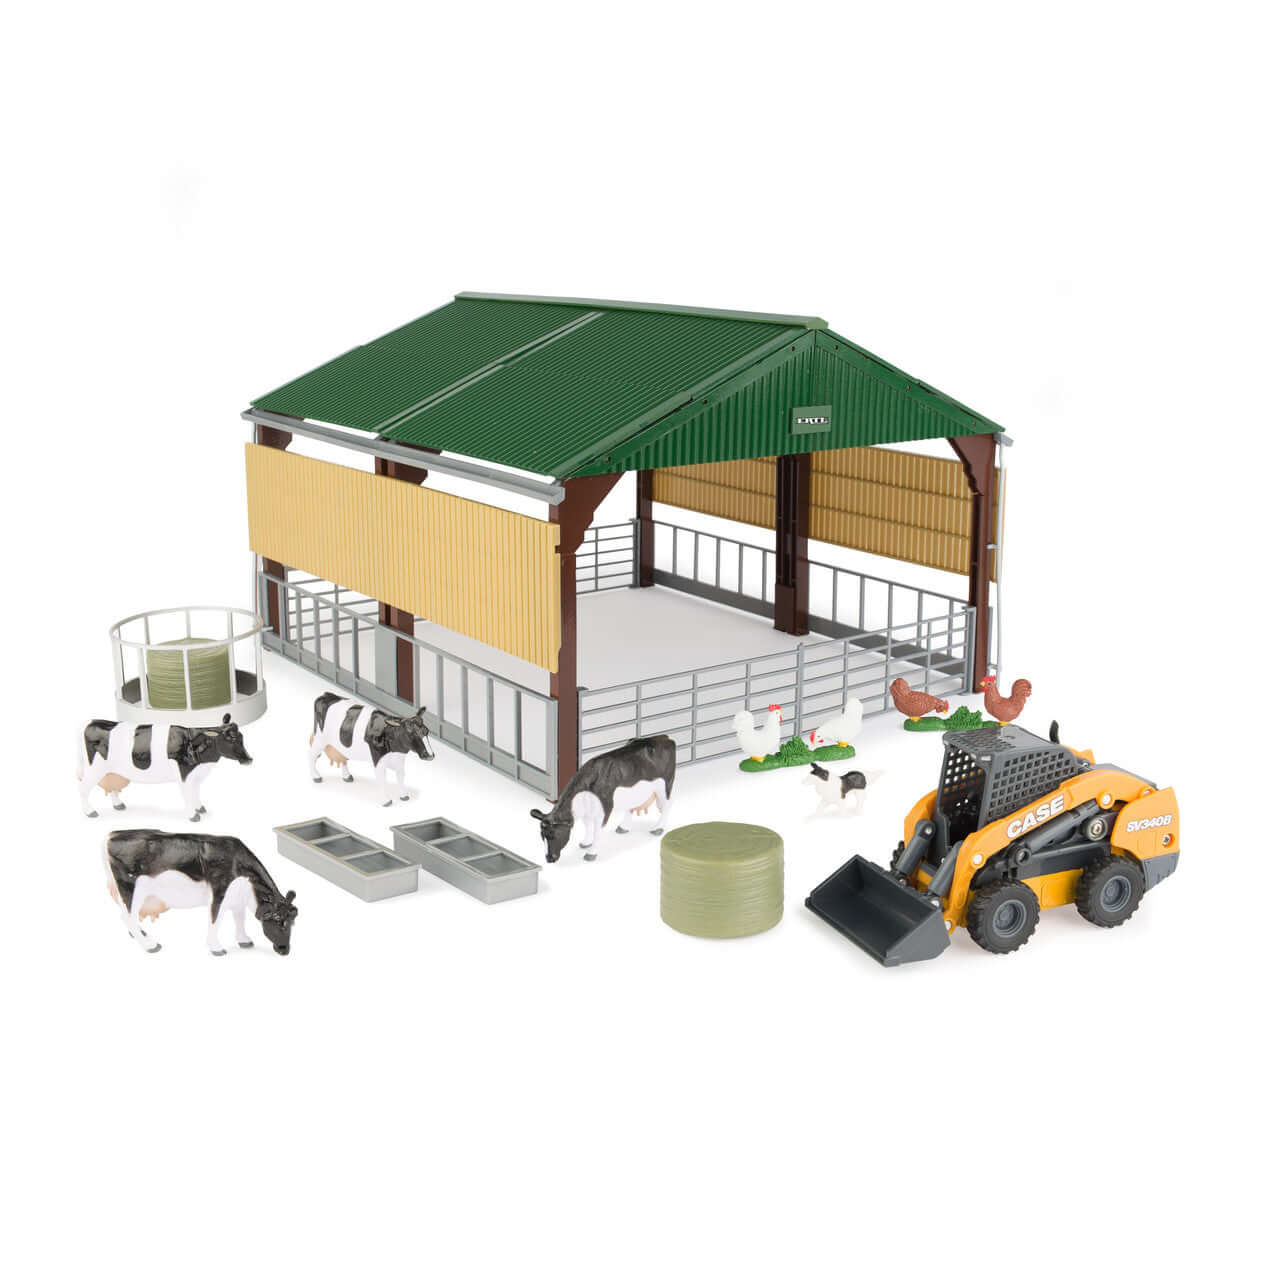 1:32 Livestock Building with Case Skid Loader and Accessories